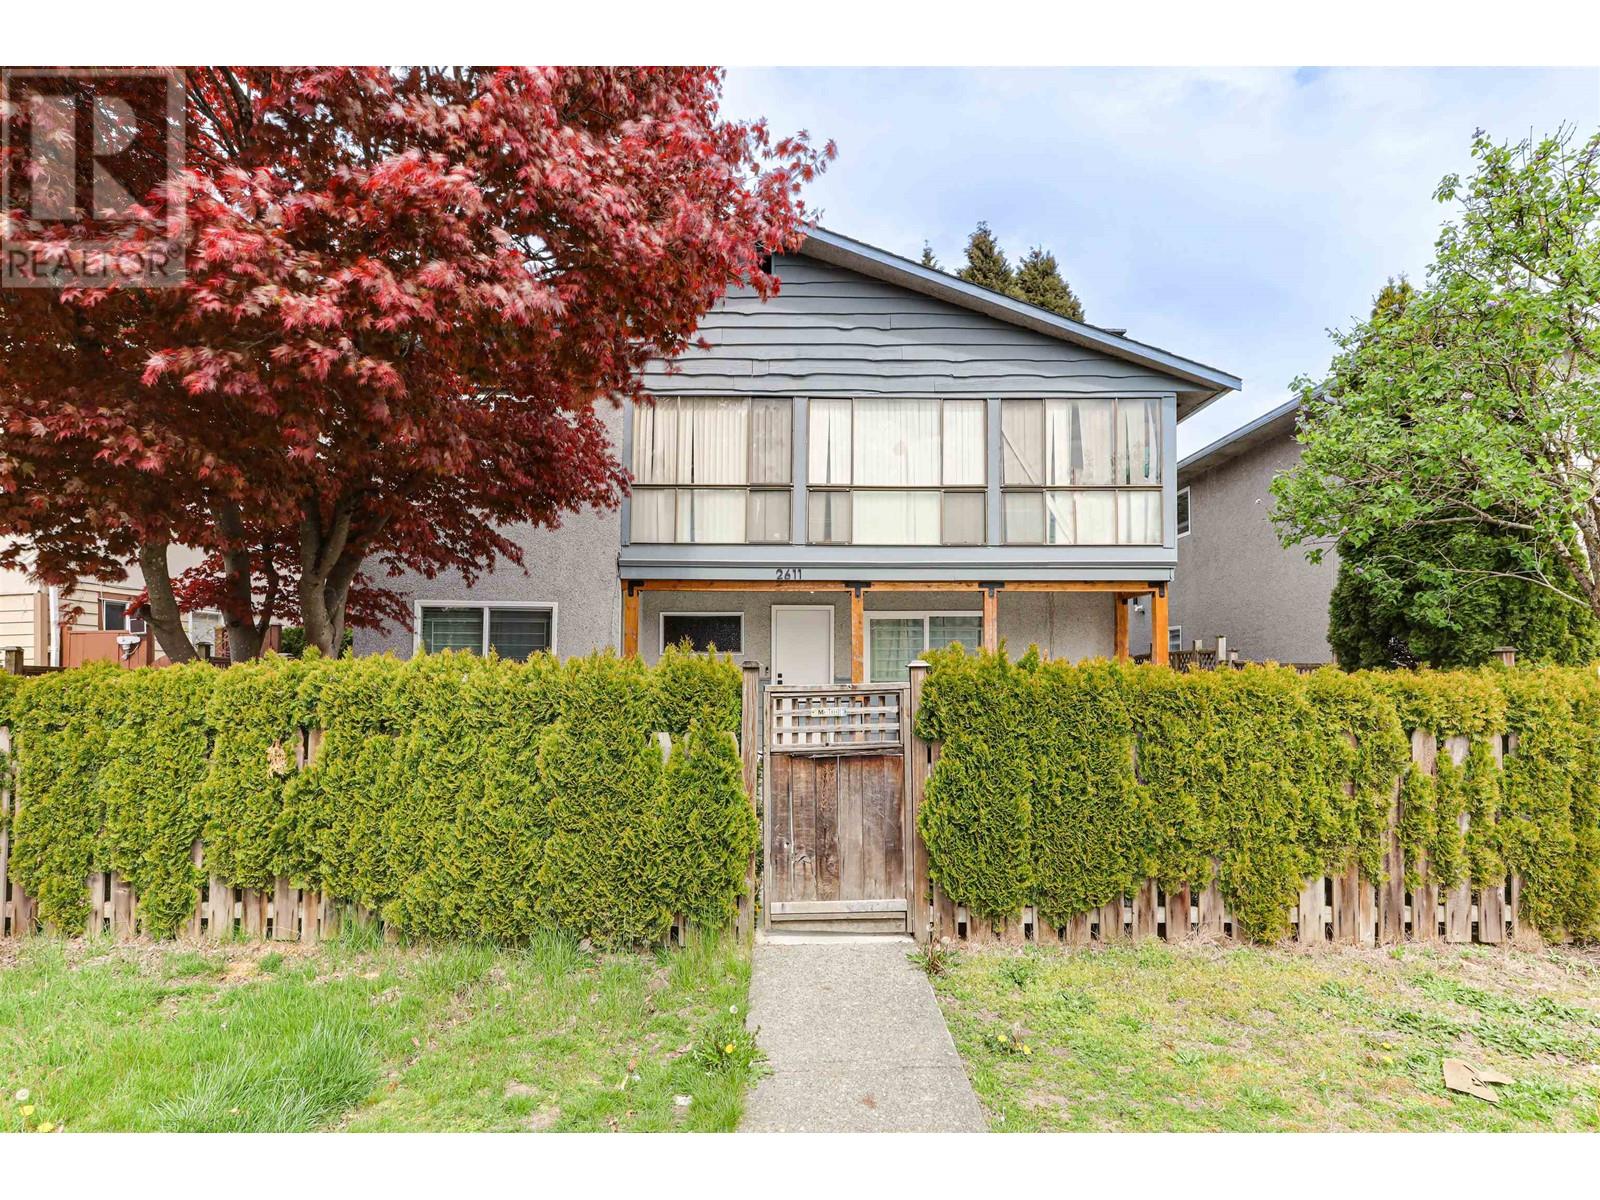 Listing Picture 2 of 39 : 2611 E 48TH AVENUE, Vancouver / 溫哥華 - 魯藝地產 Yvonne Lu Group - MLS Medallion Club Member